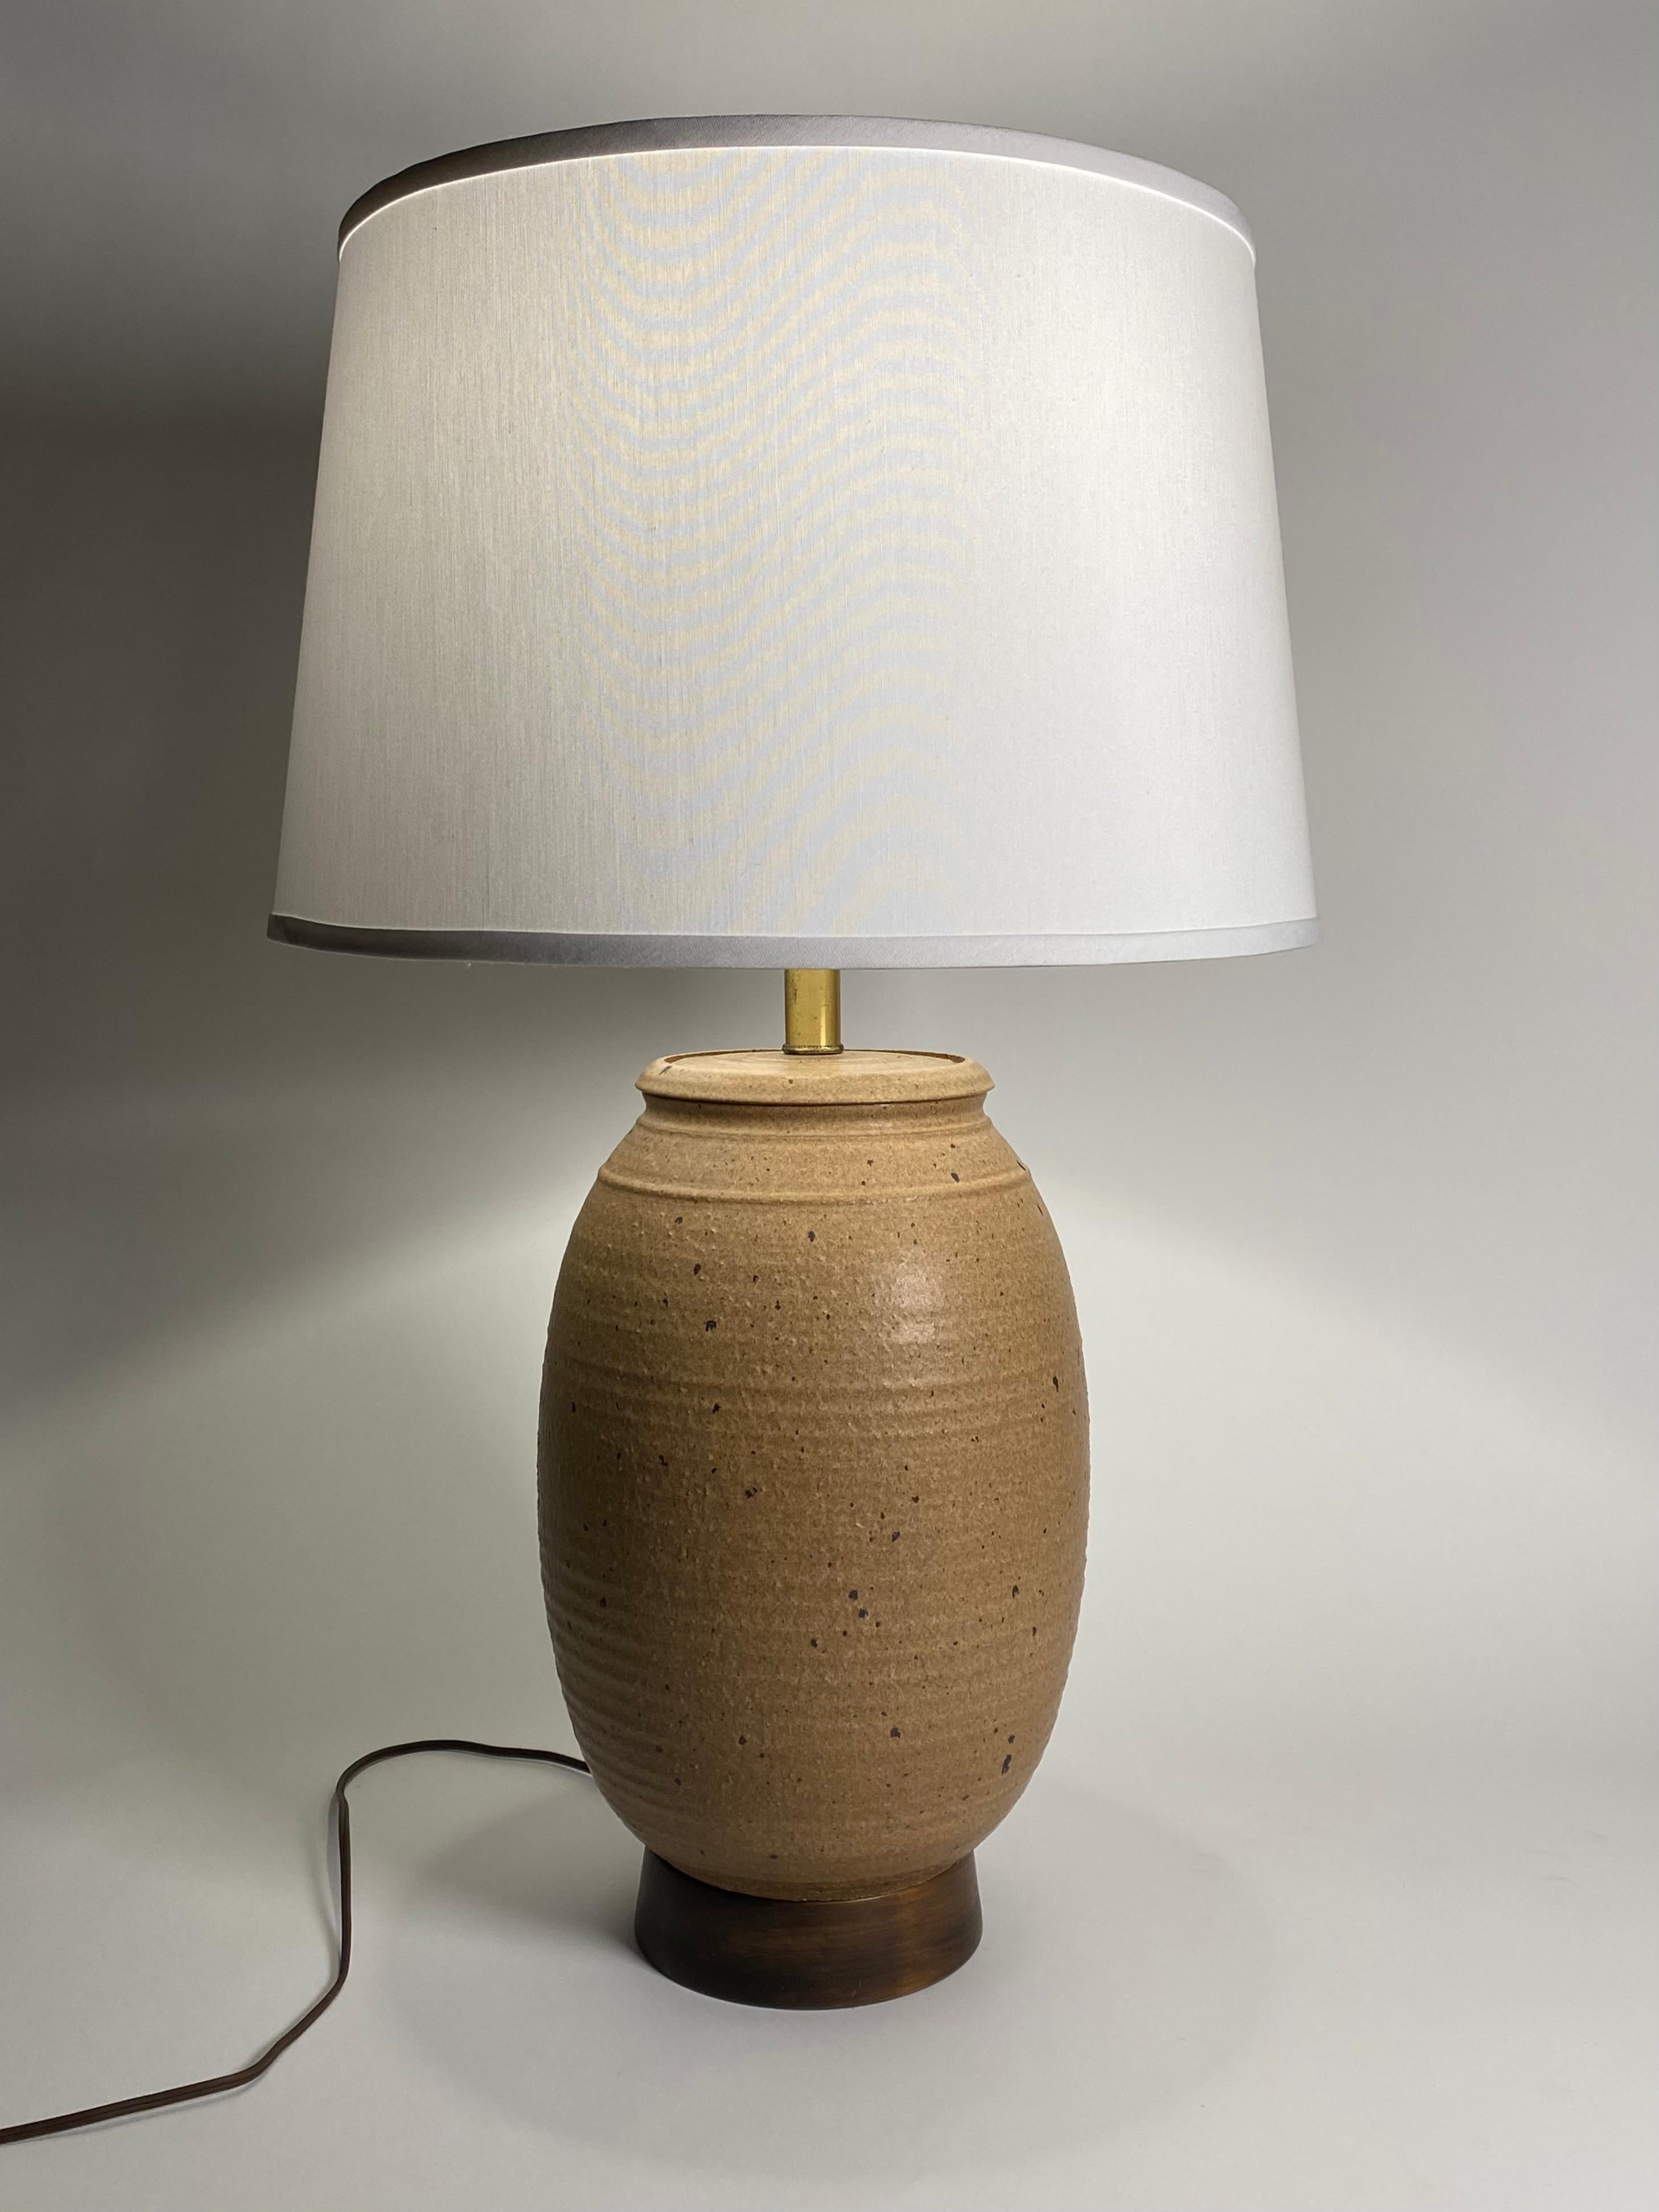 Studio ceramic table lamp by Bob Kinzie for Affiliated Craftsman, having an earth tone brown body with dark brown speckles over the entire piece. Resting on a dark walnut colored wood base with brass hardware, measurements are a 9